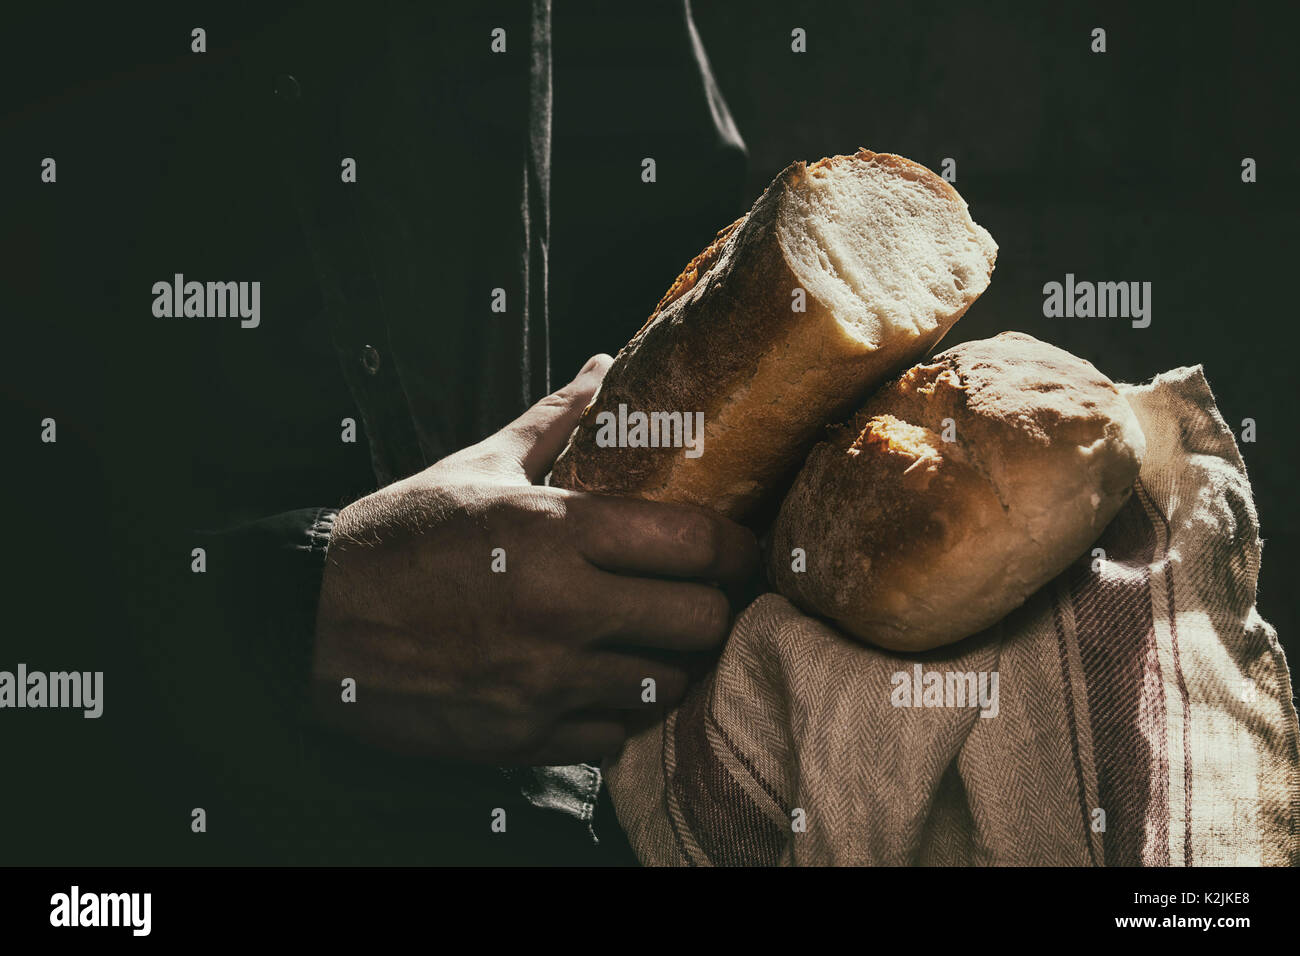 Loaf of fresh baked wheat bread in man's hands in sunshine. Rustic day light in dark room. Toned image Stock Photo